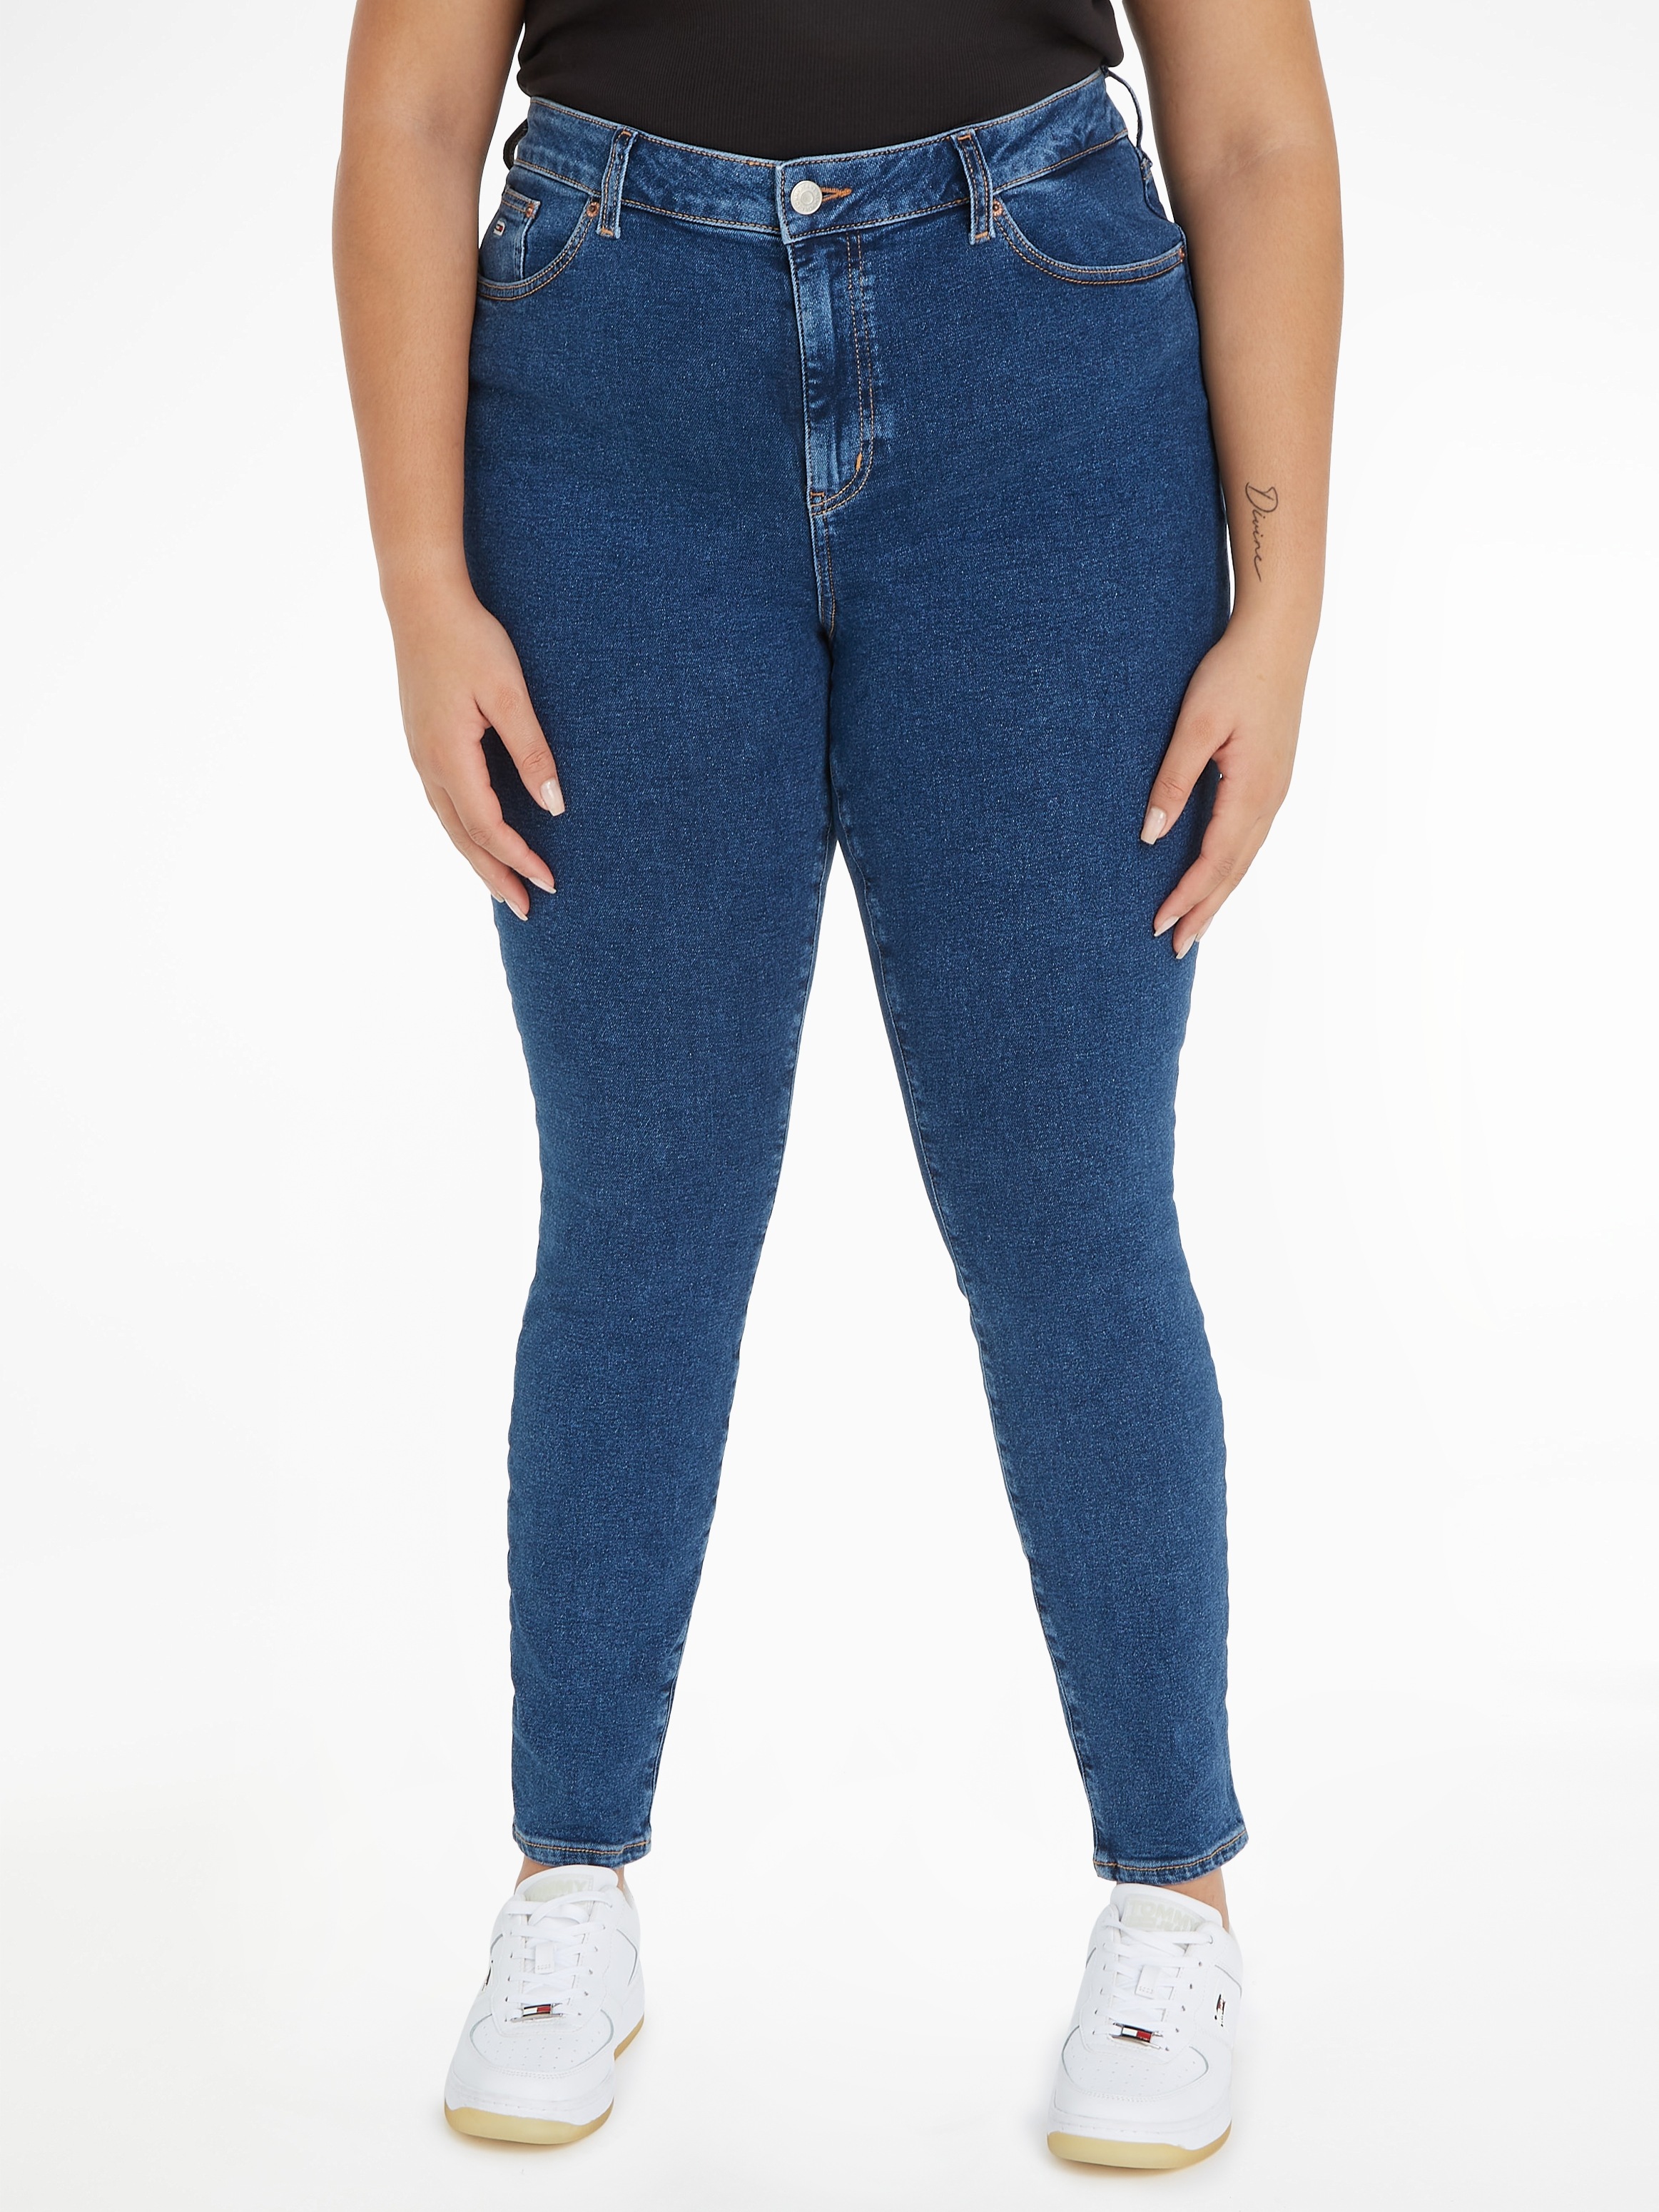 Tommy in Skinny-fit-Jeans, PLUS Curve OTTOversand Weiten angeboten bei CURVE, Jeans SIZE Jeans wird